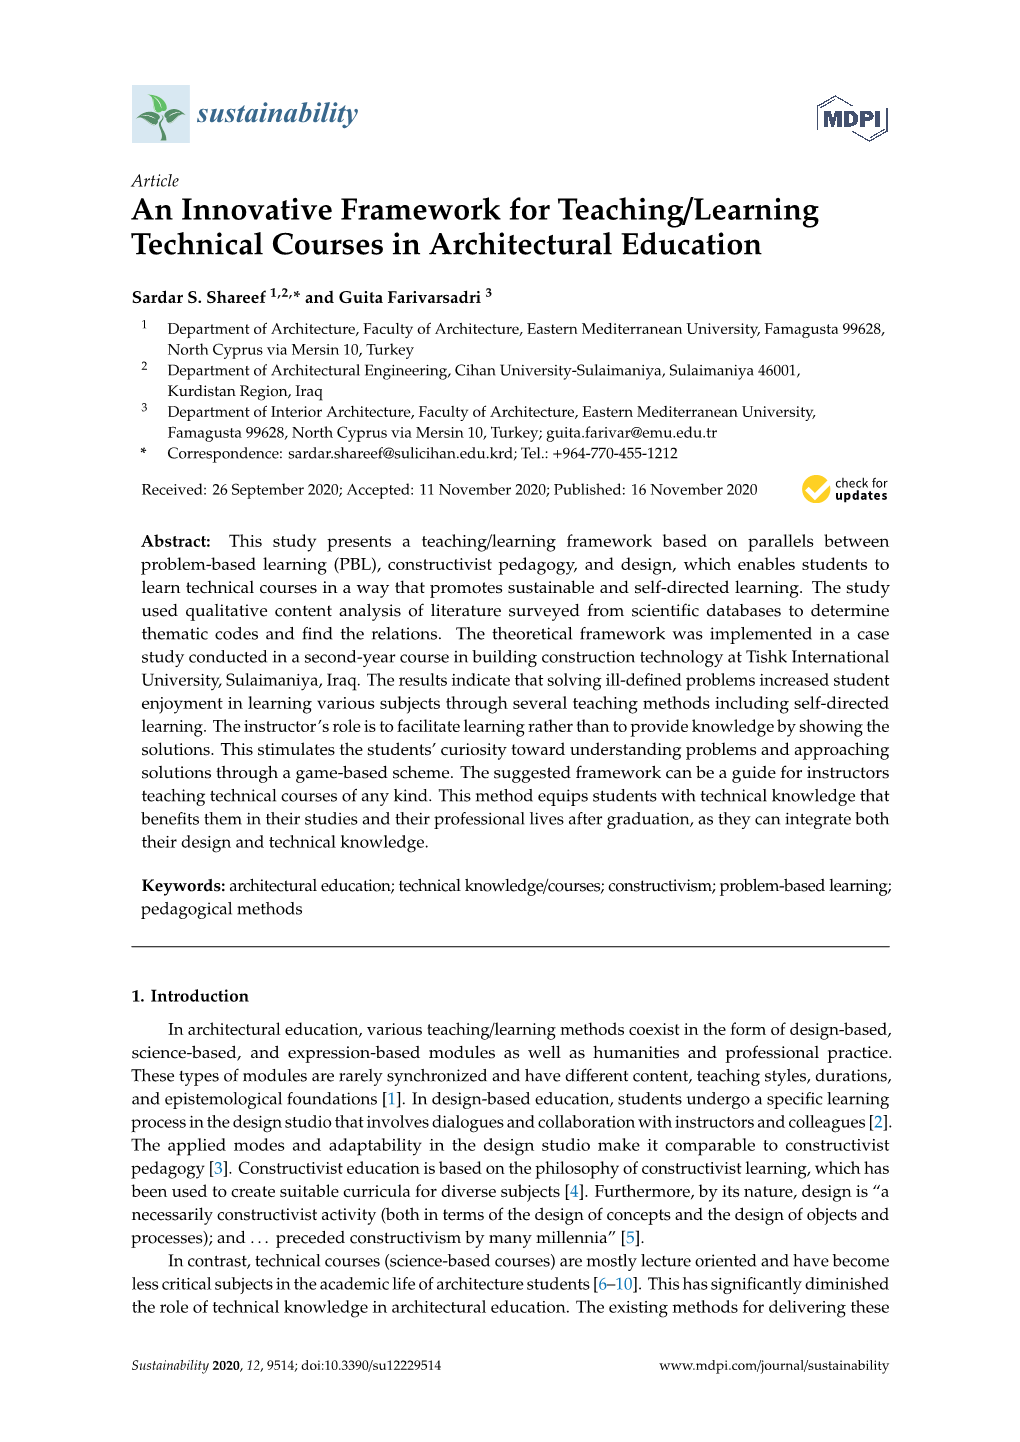 An Innovative Framework for Teaching/Learning Technical Courses in Architectural Education